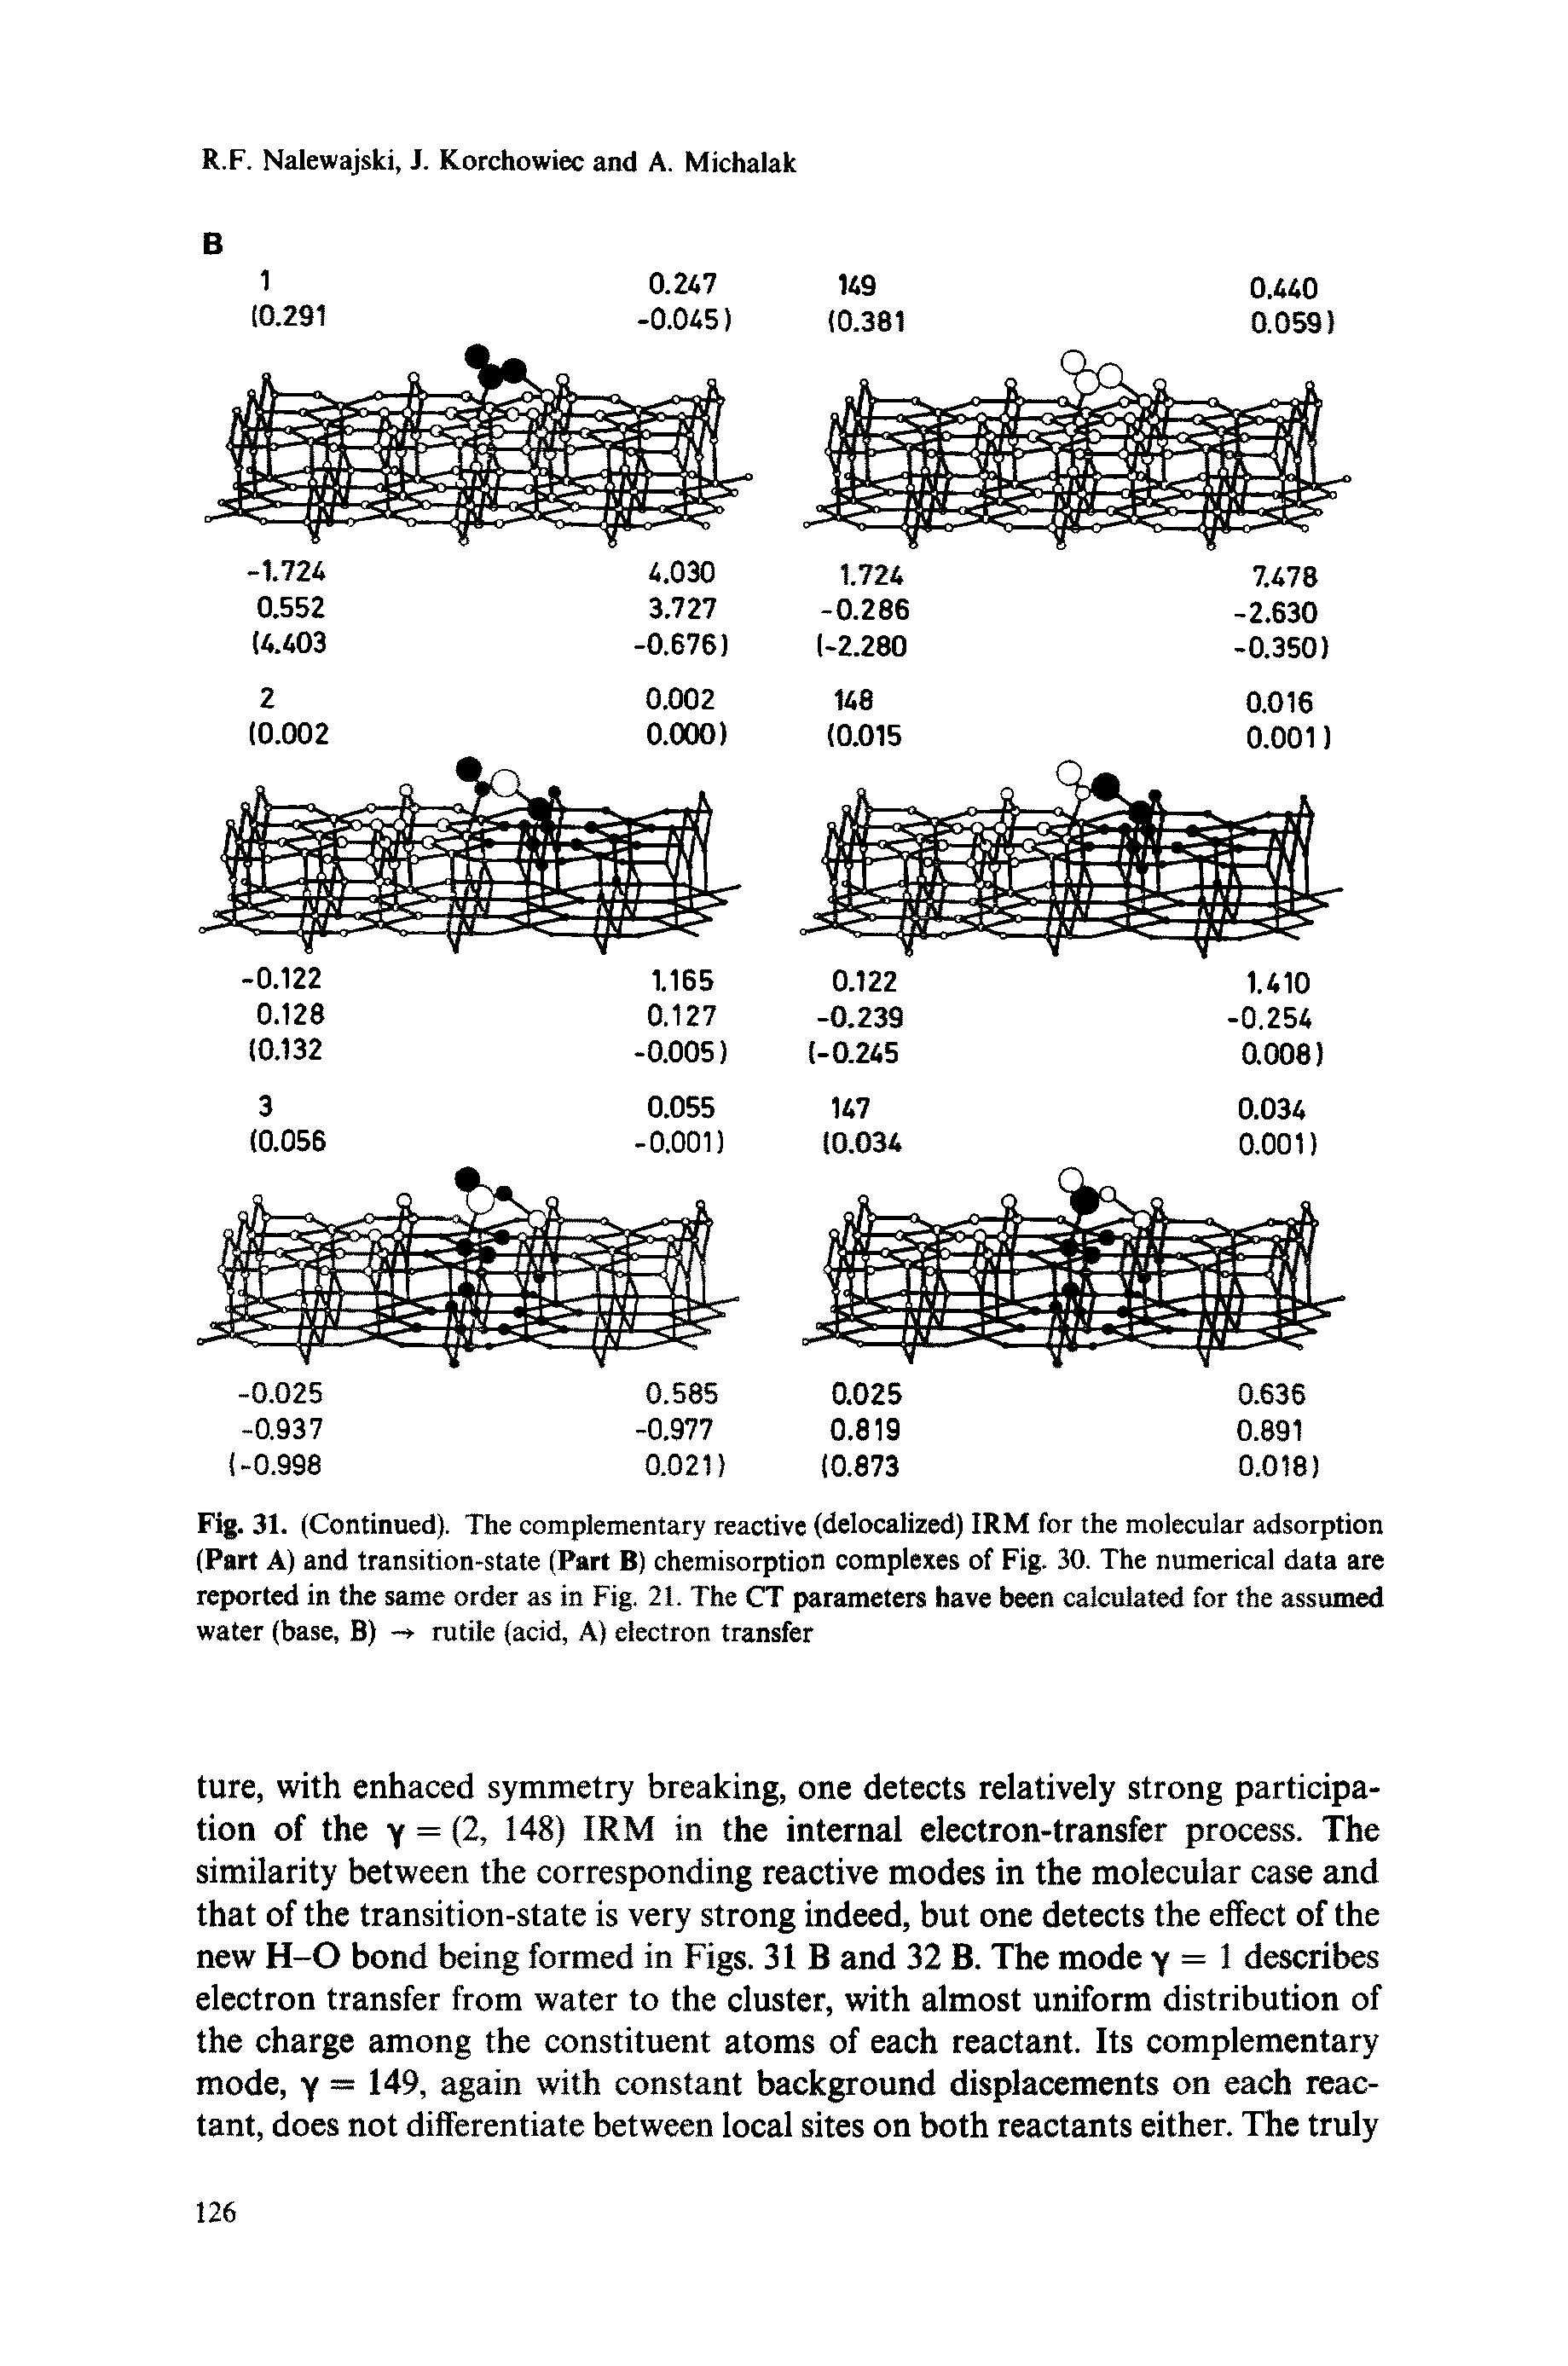 Fig. 31. (Continued). The complementary reactive (delocalized) IRM for the molecular adsorption (Part A) and transition-state (Part B) chemisorption complexes of Fig. 30. The numerical data are reported in the same order as in Fig. 21. The CT parameters have been calculated for the assumed water (base, B) - rutile (acid, A) electron transfer...